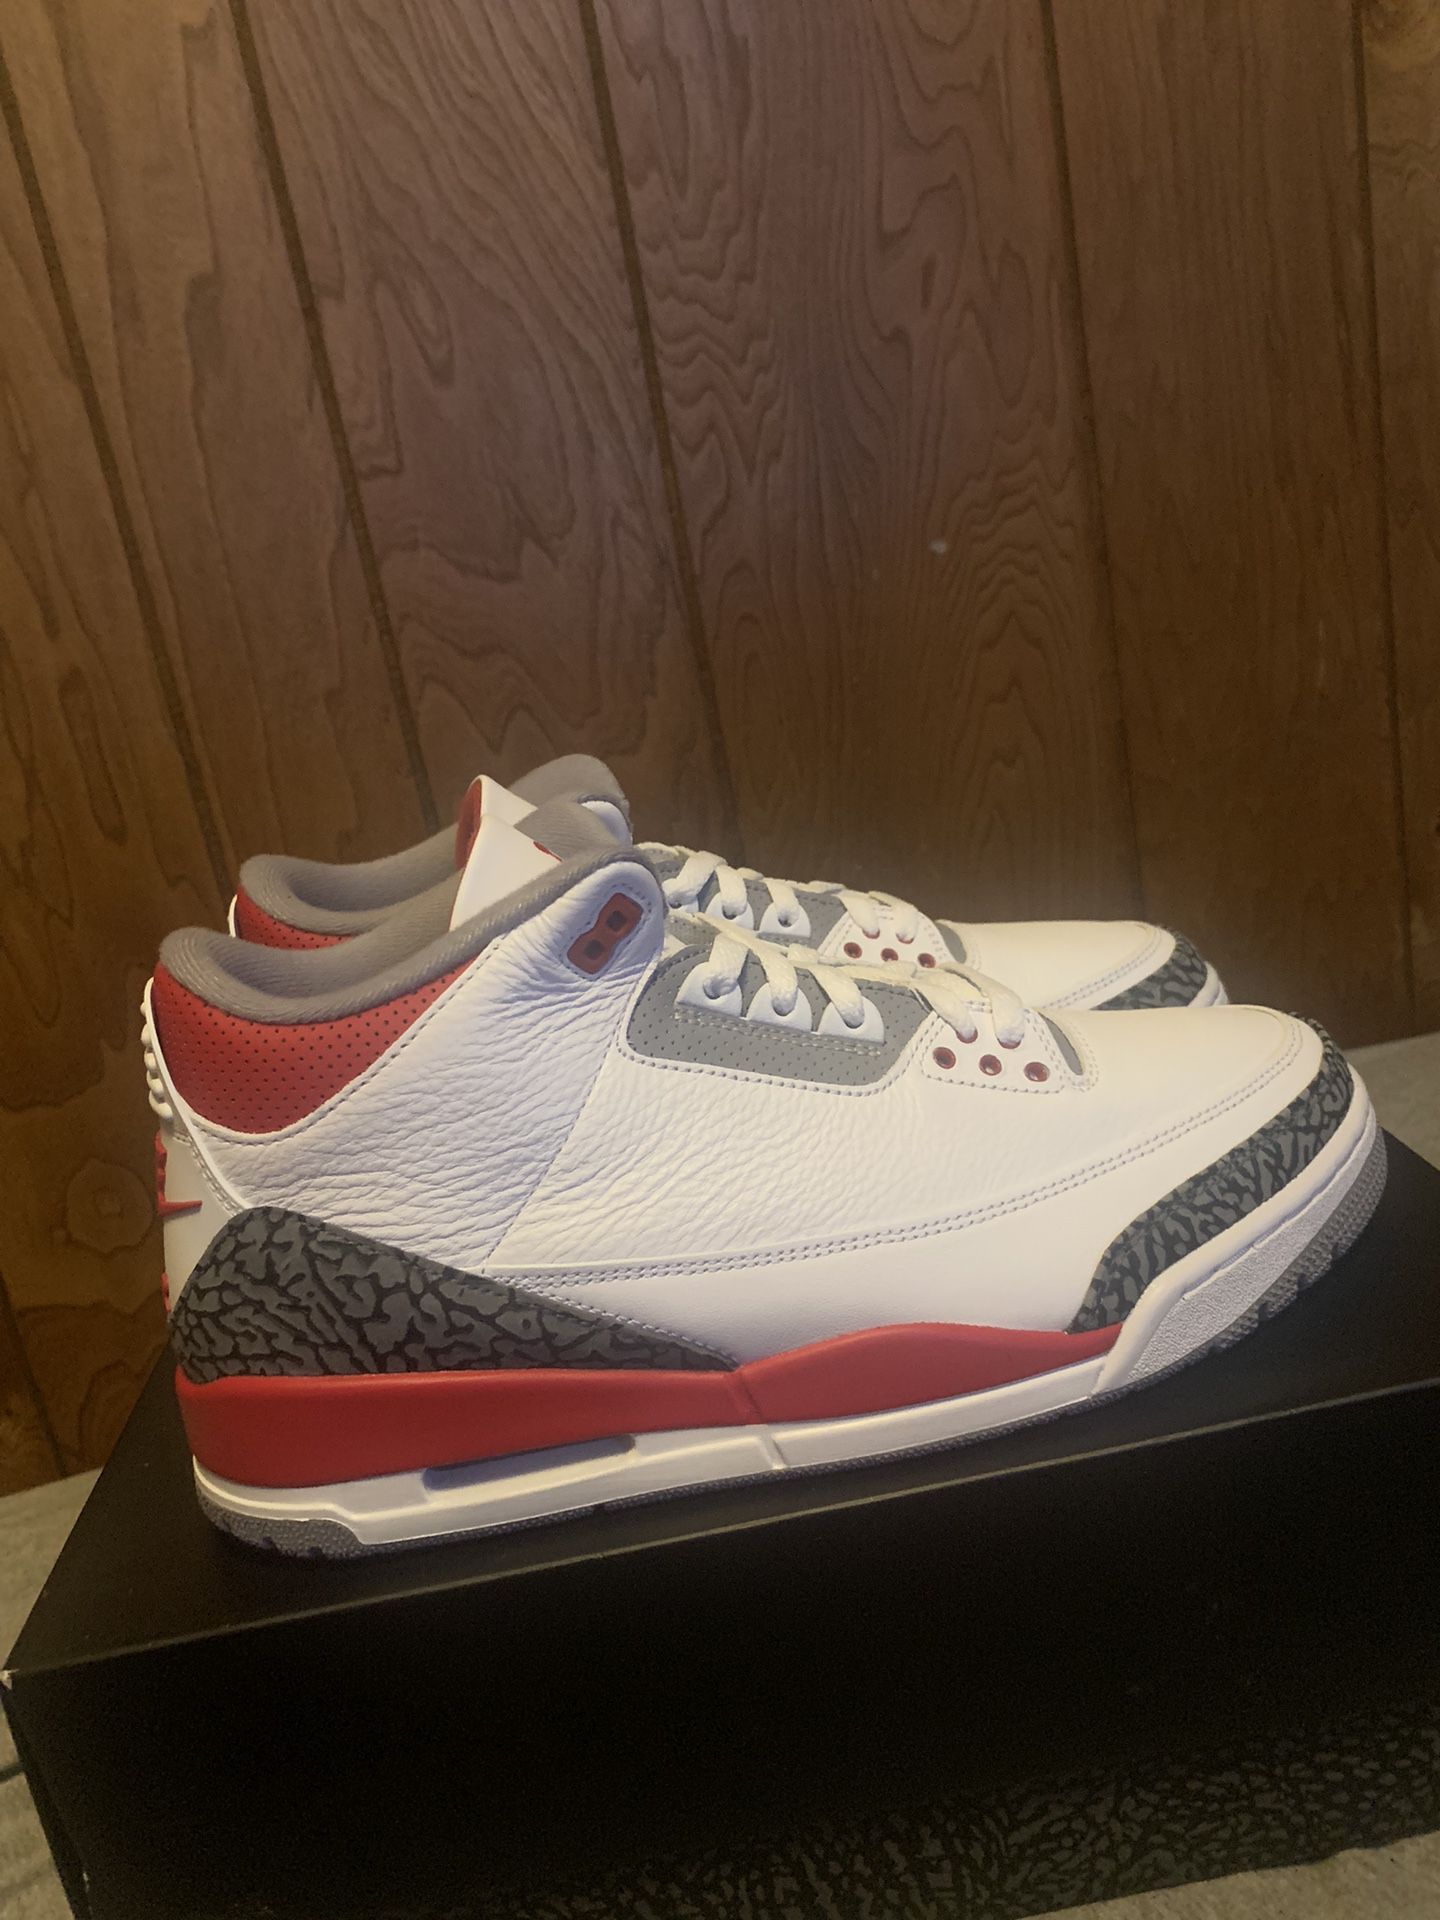 Fire Red 3s Size 11.5